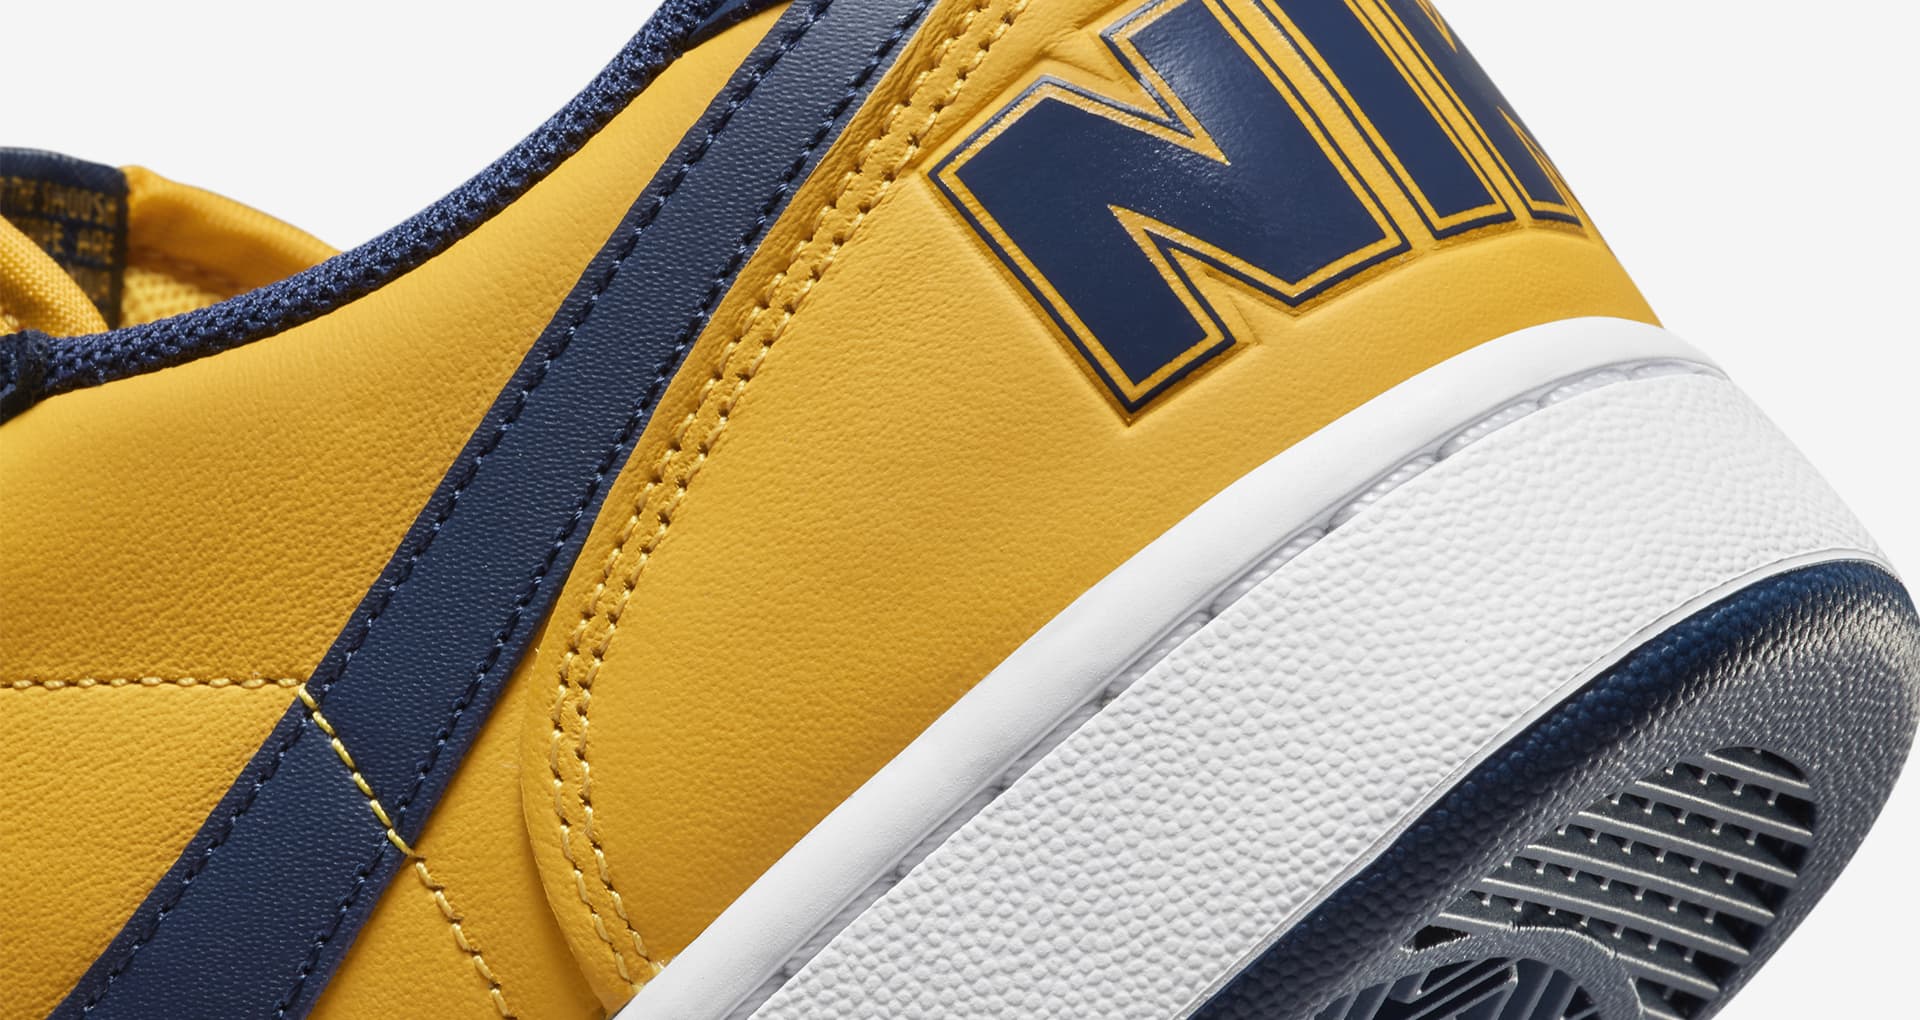 Terminator Low 'University Gold and Navy' (FJ4206-700) Release Date ...